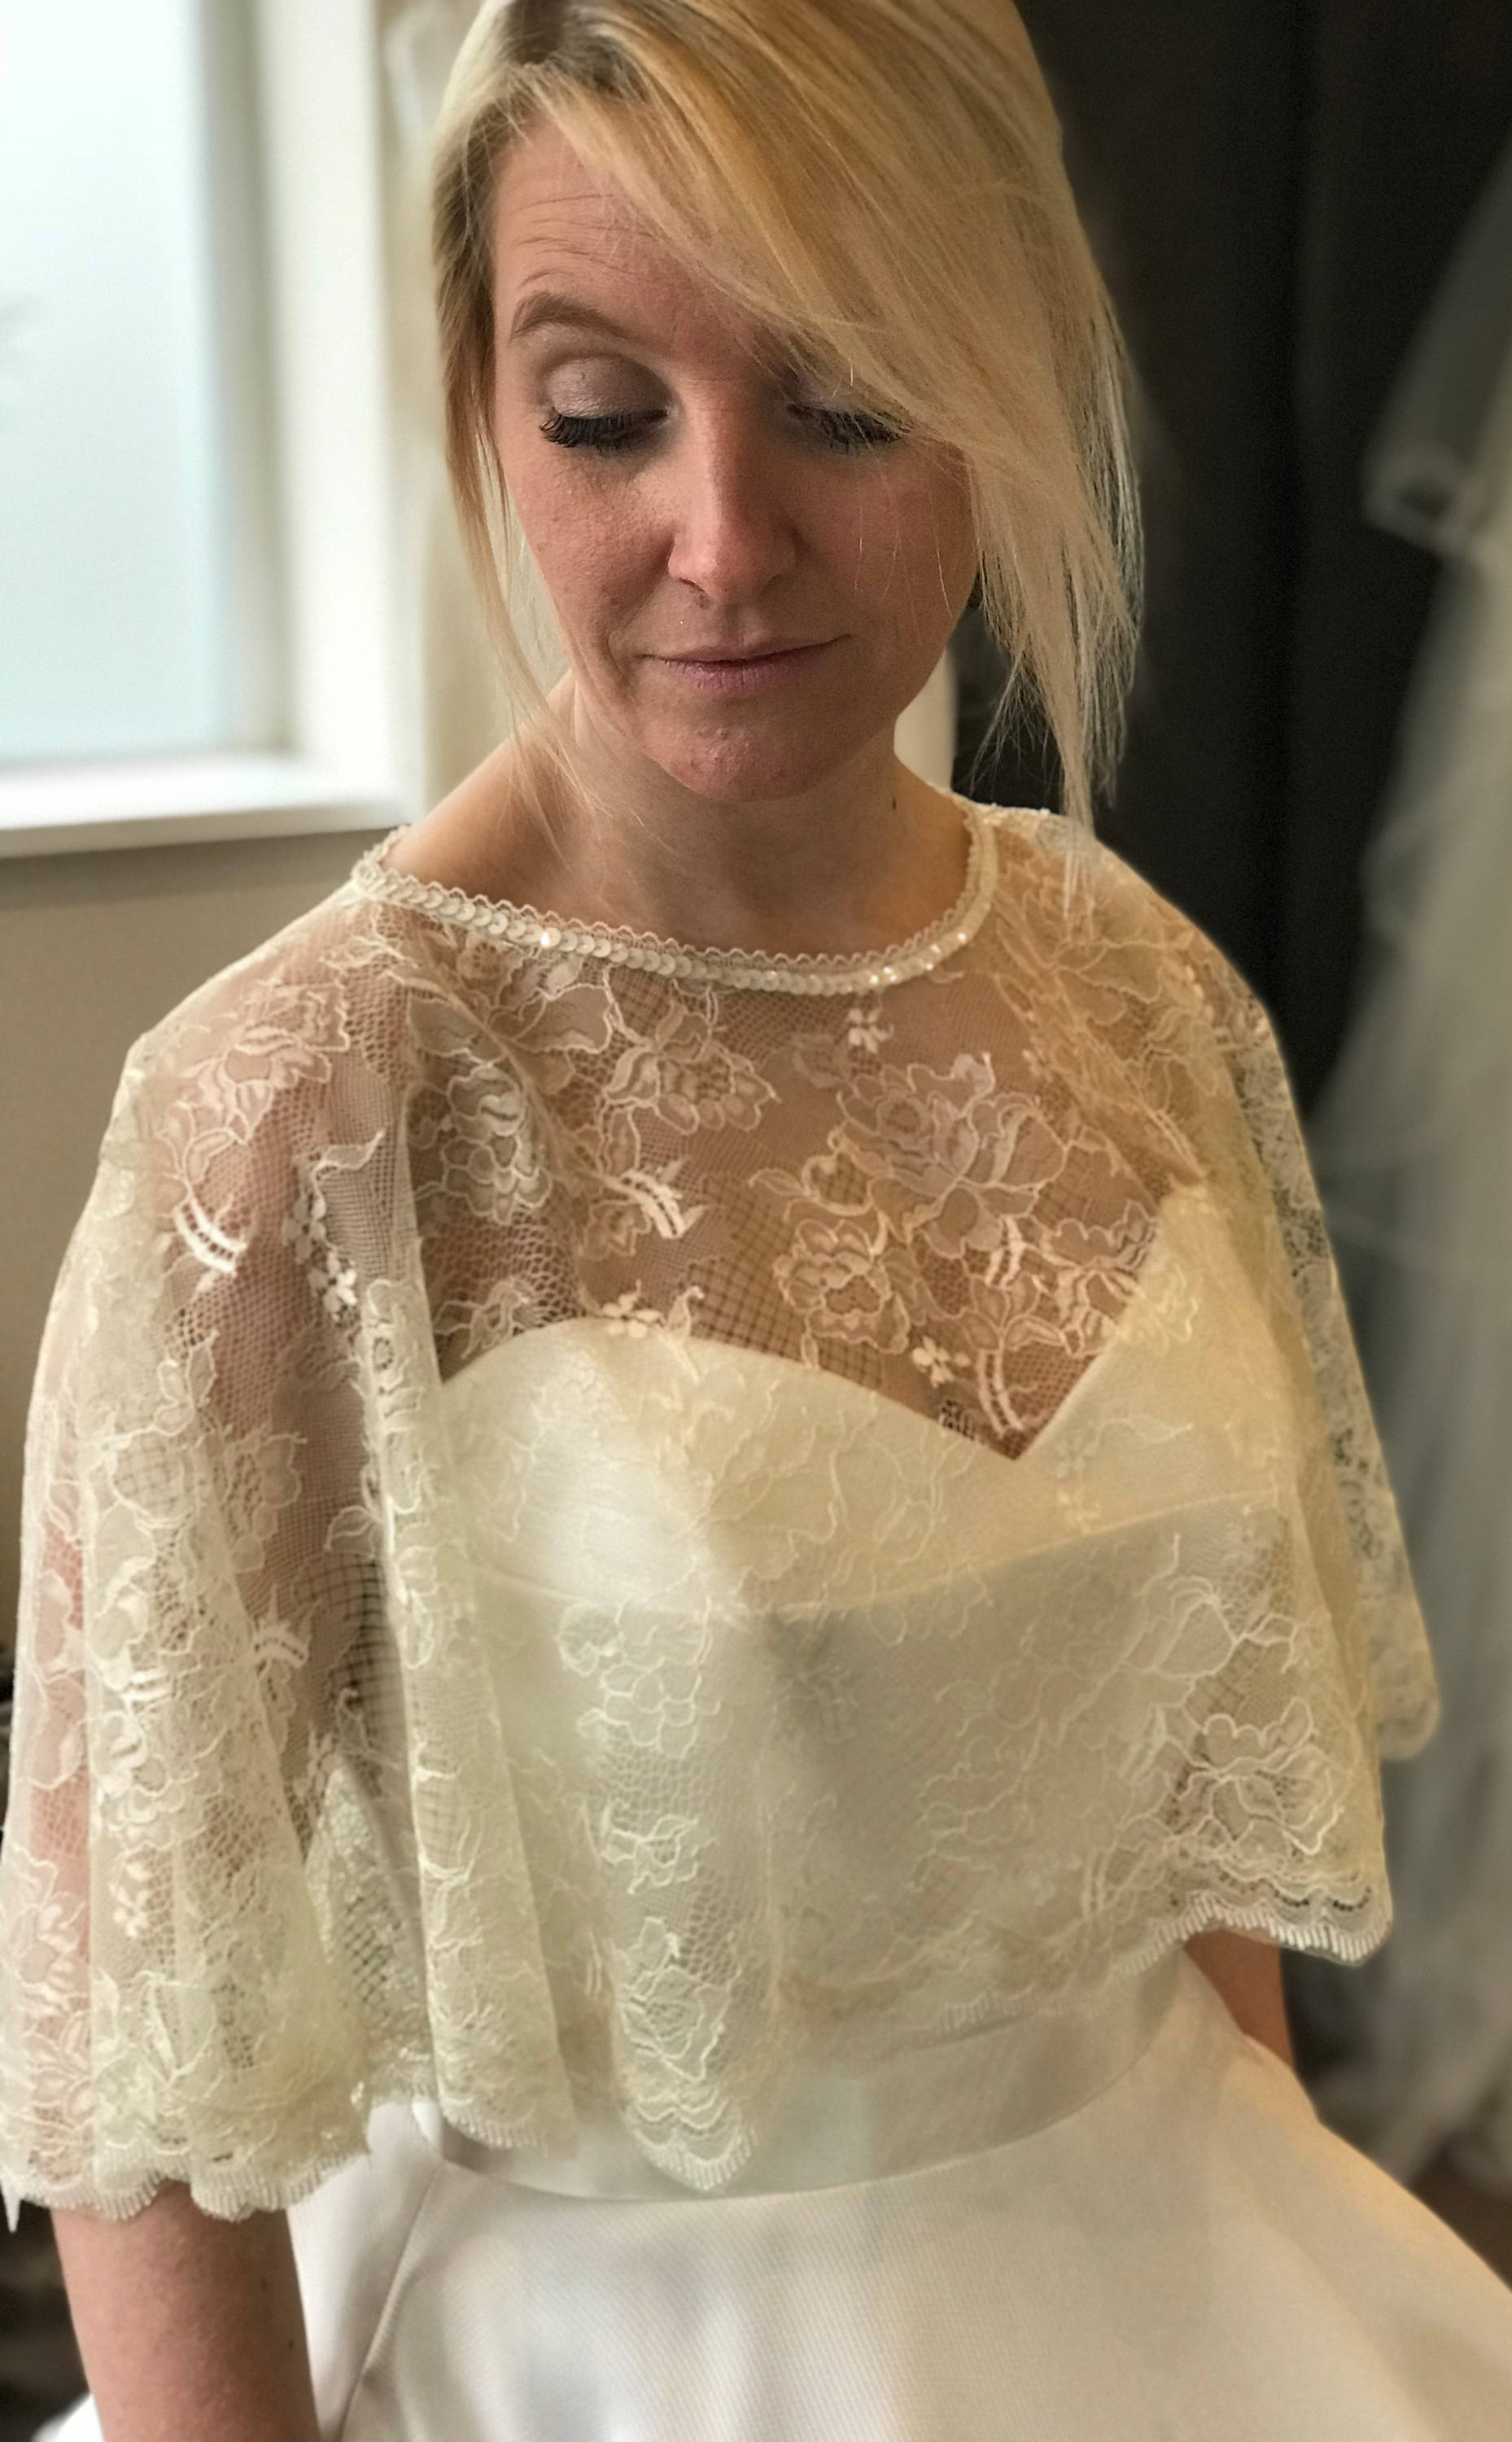 Wedding Bridal Cape. Pale gold and ivory lace capelet | Etsy